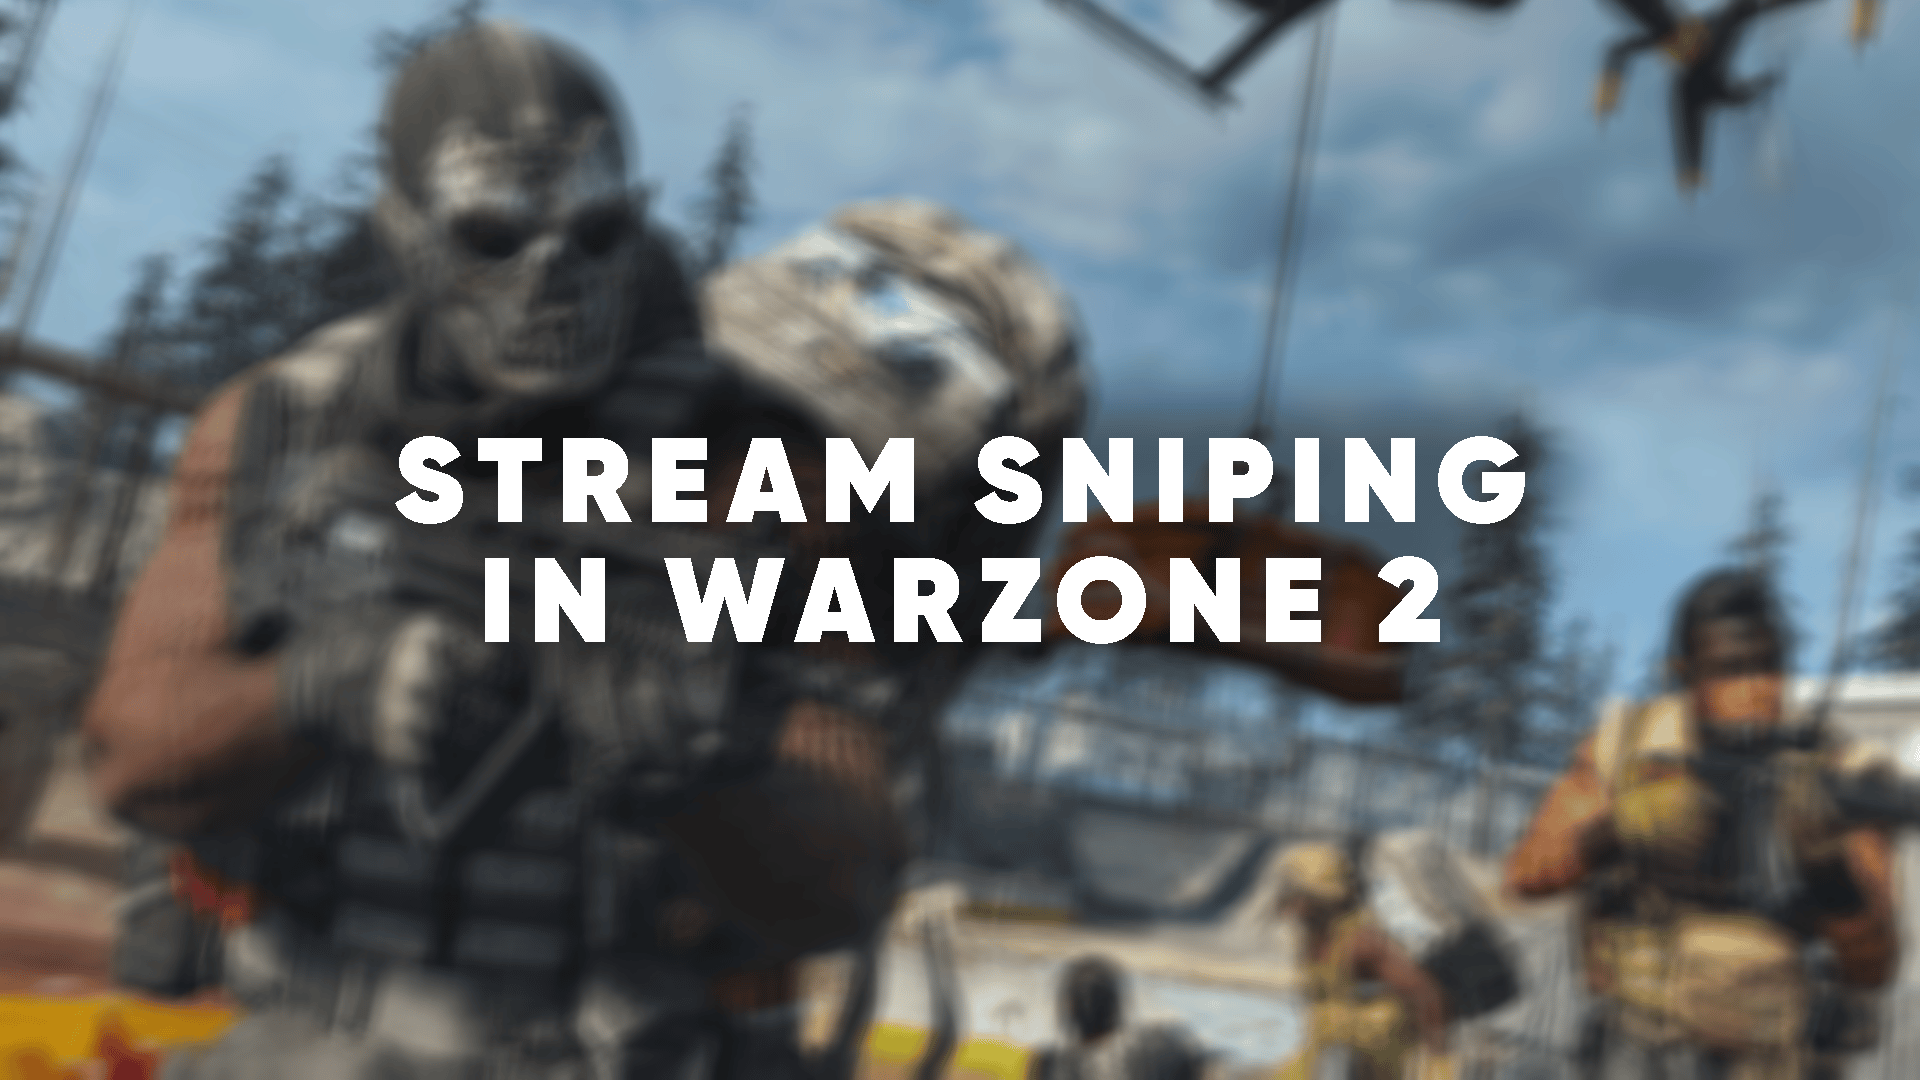 A guide with all the information about Stream Sniping in Warzone 2.